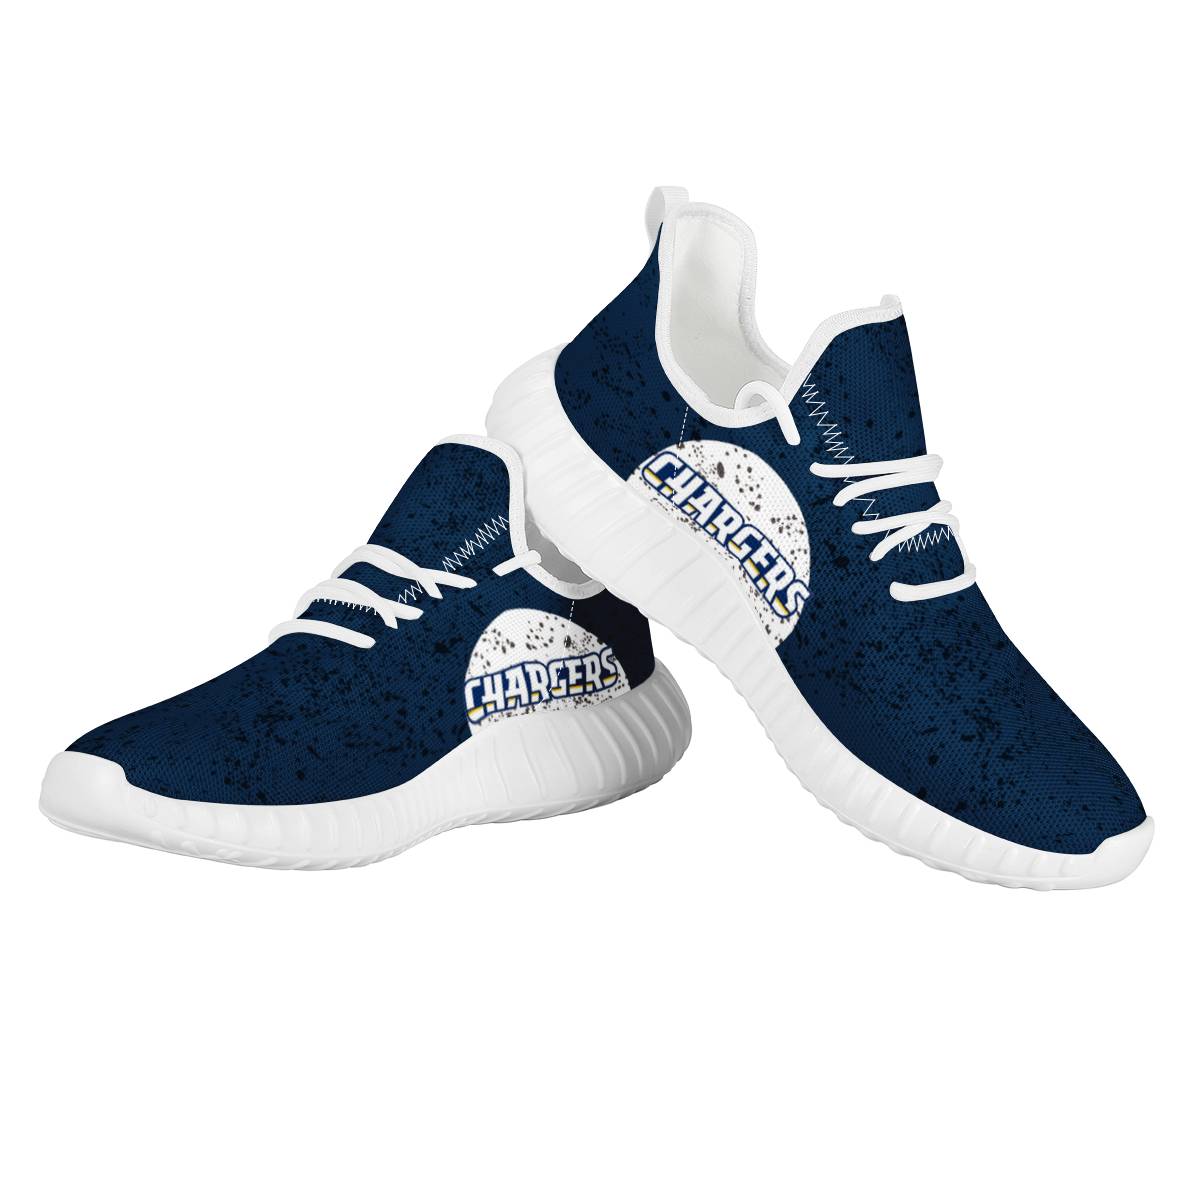 Men's Los Angeles Chargers Mesh Knit Sneakers/Shoes 003